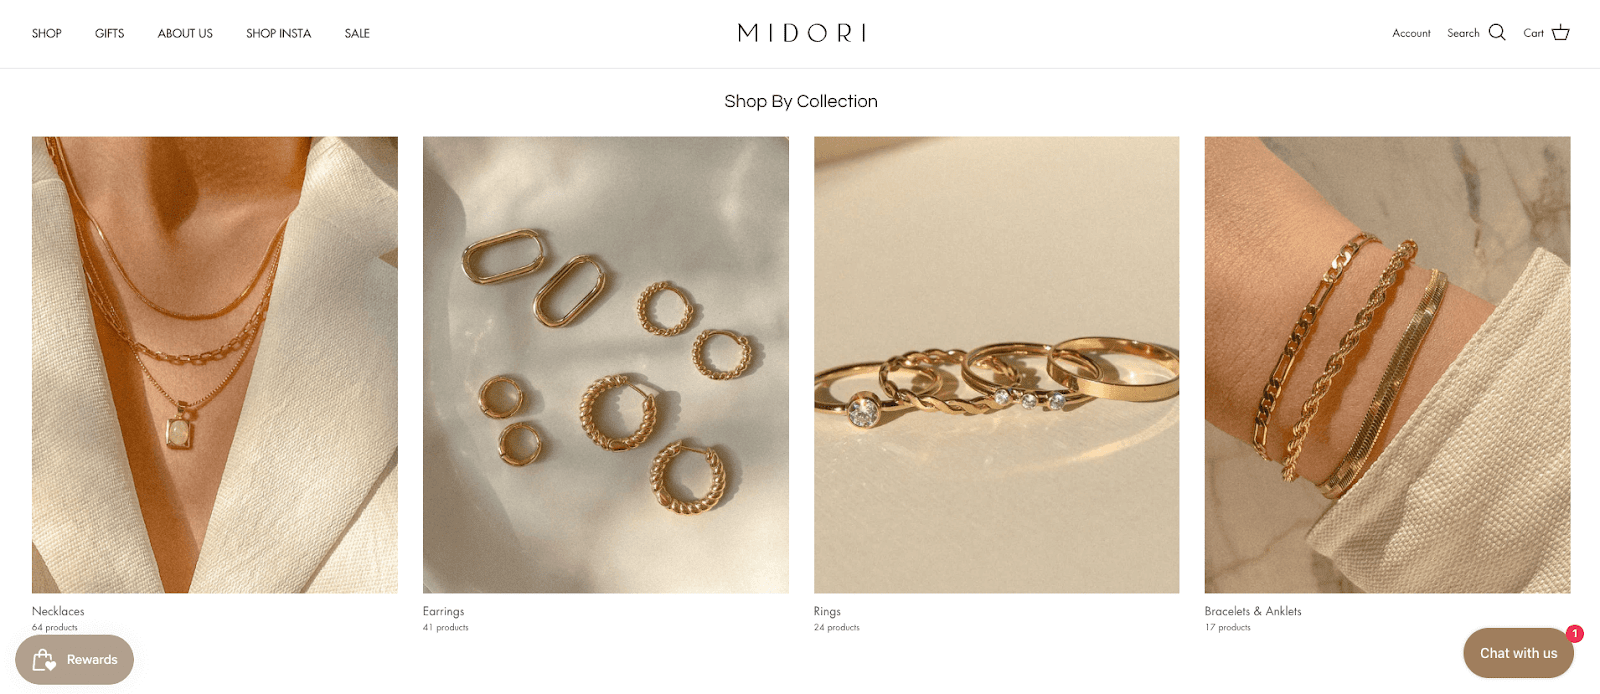 Valentine’s Day Gift Guide–A screenshot from Midori Jewelry Co.’s homepage showing their collections. The heading reads, “Shop by Collection”. Underneath there are 4 minimalist, product images of gold dainty jewelry representing their four collections: Necklaces, Earrings, Rings, Bracelets and Anklets. 